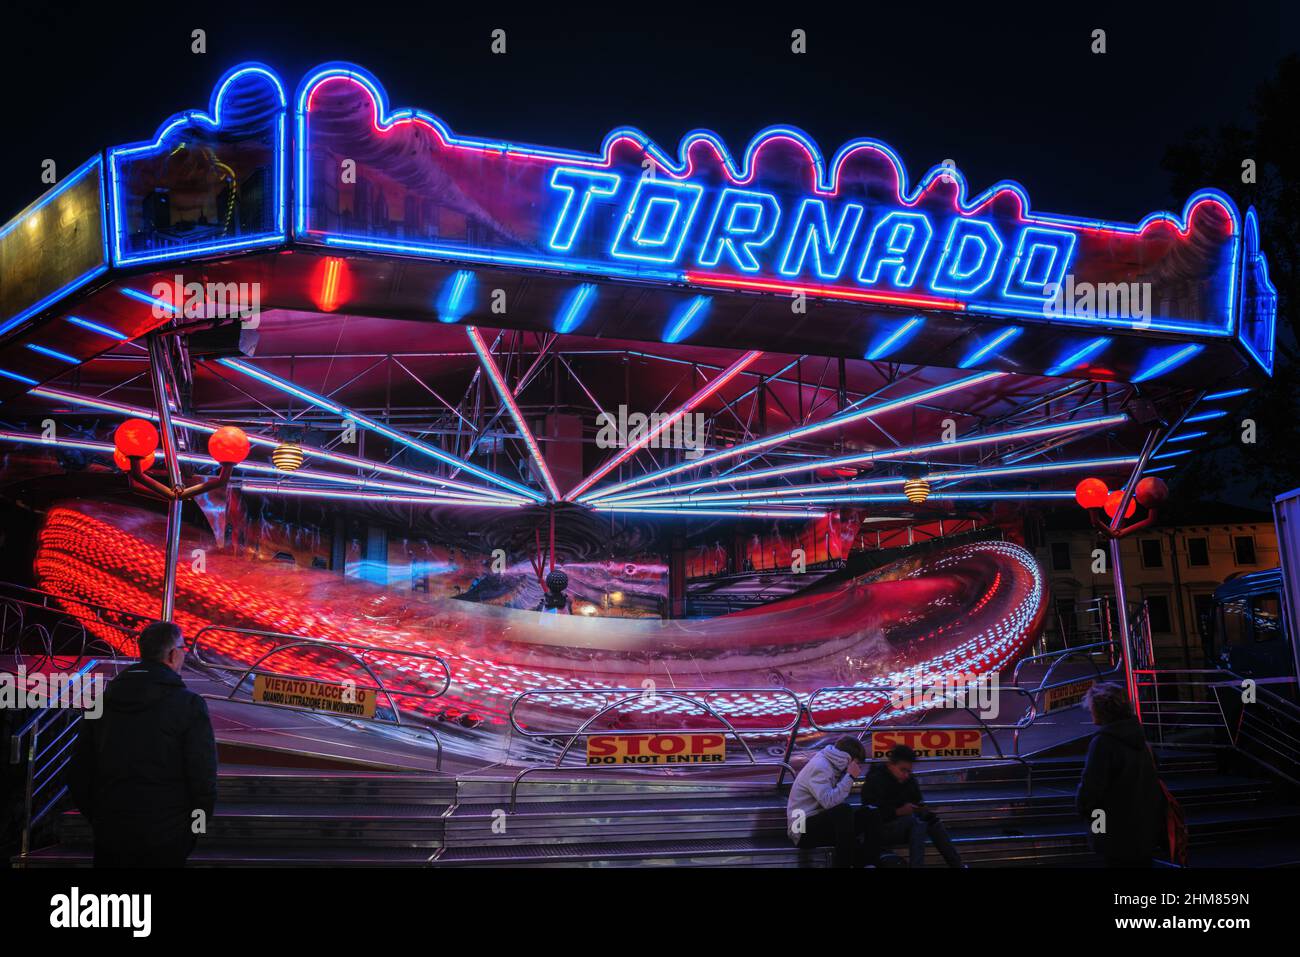 Tornado attraction running in the dark. Luna park attraction. Long exposure photography. Stock Photo